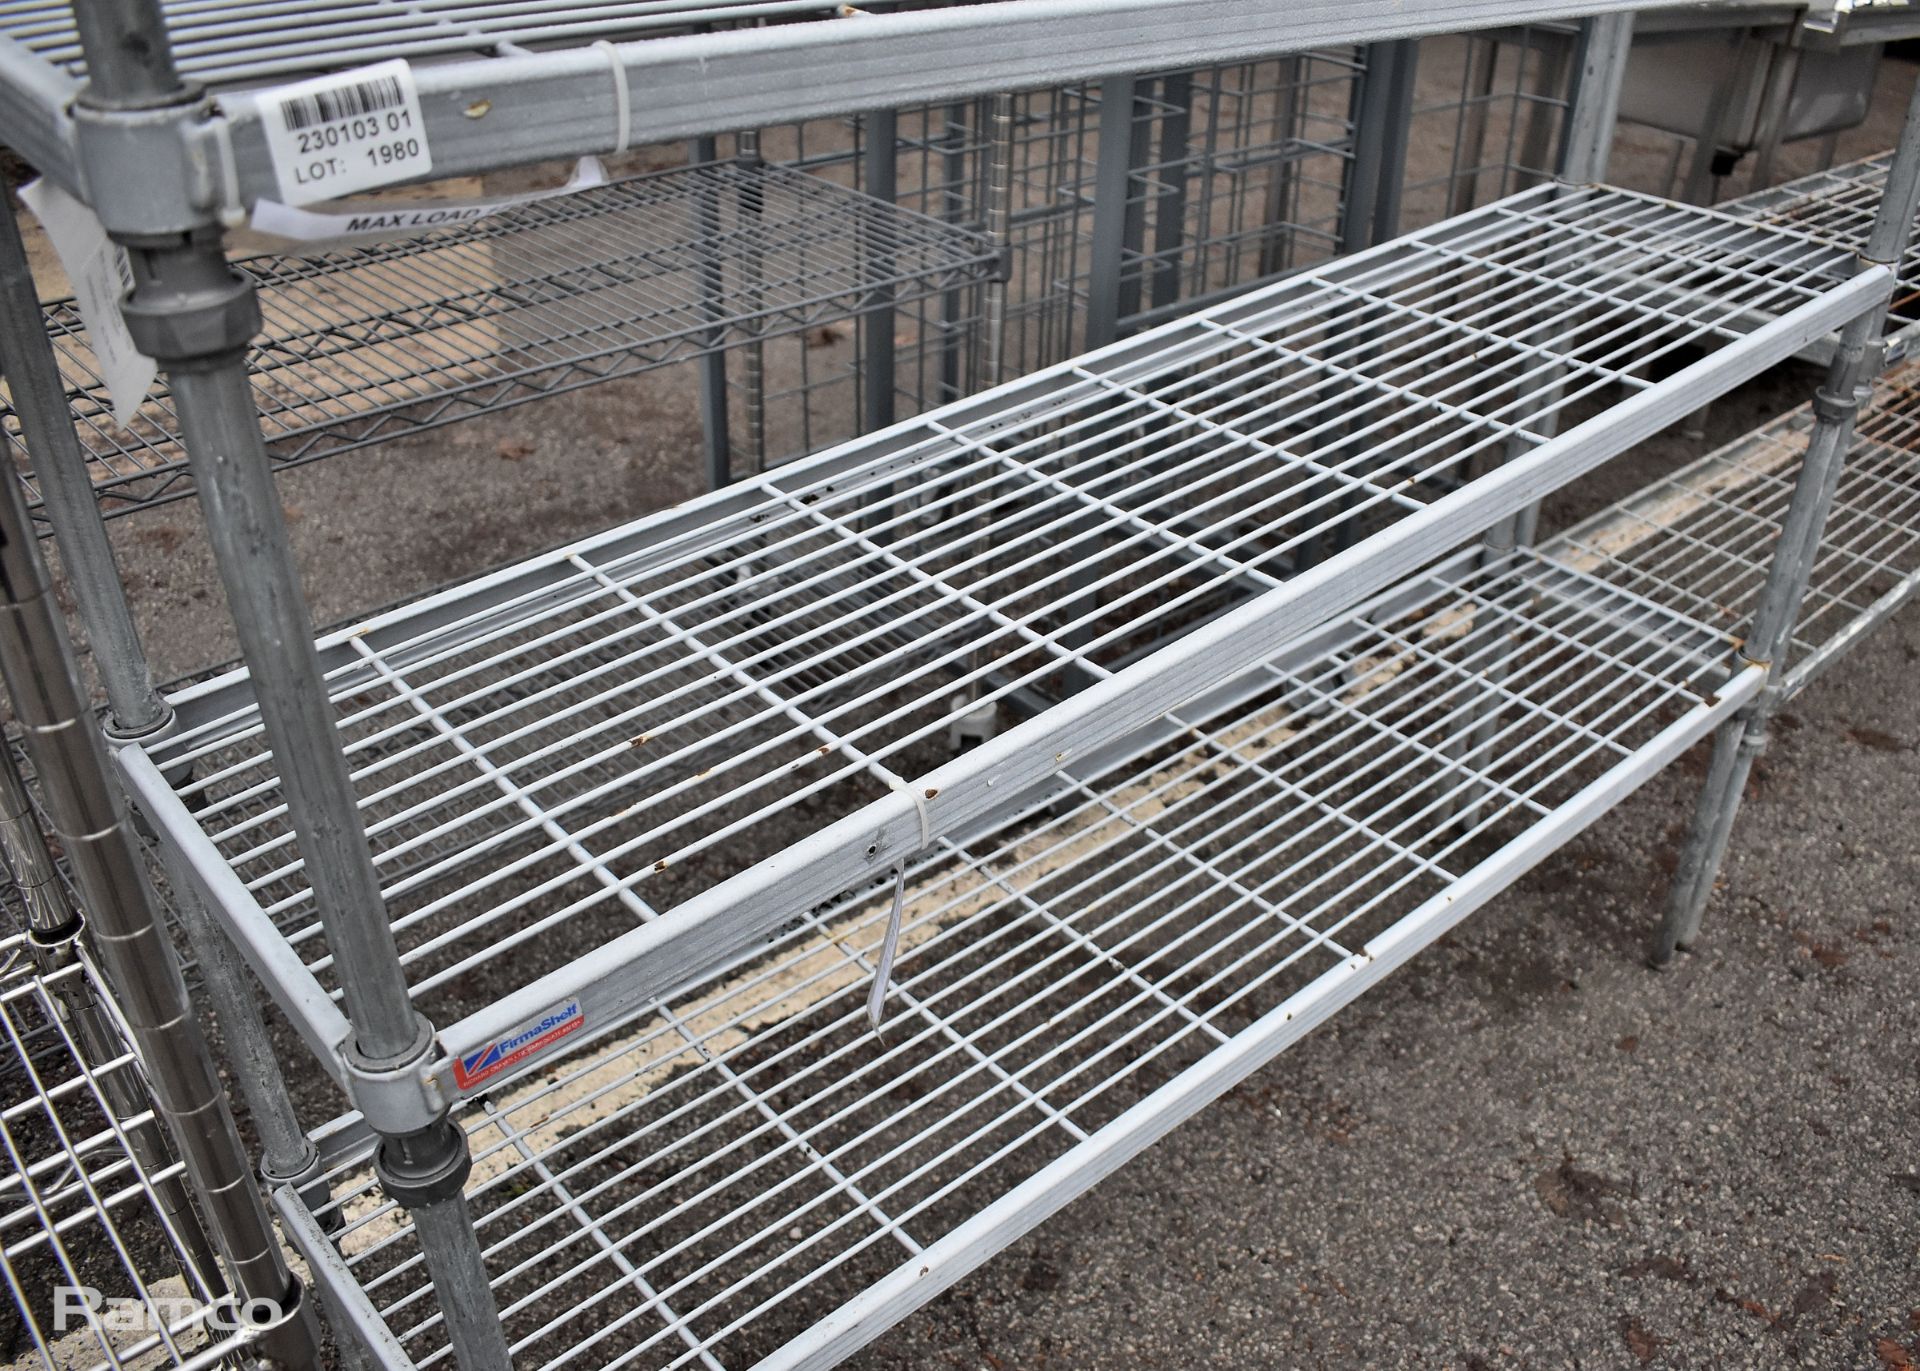 Stainless steel 3 tier wire racking - L153 x W38 x H152cm - Image 2 of 3